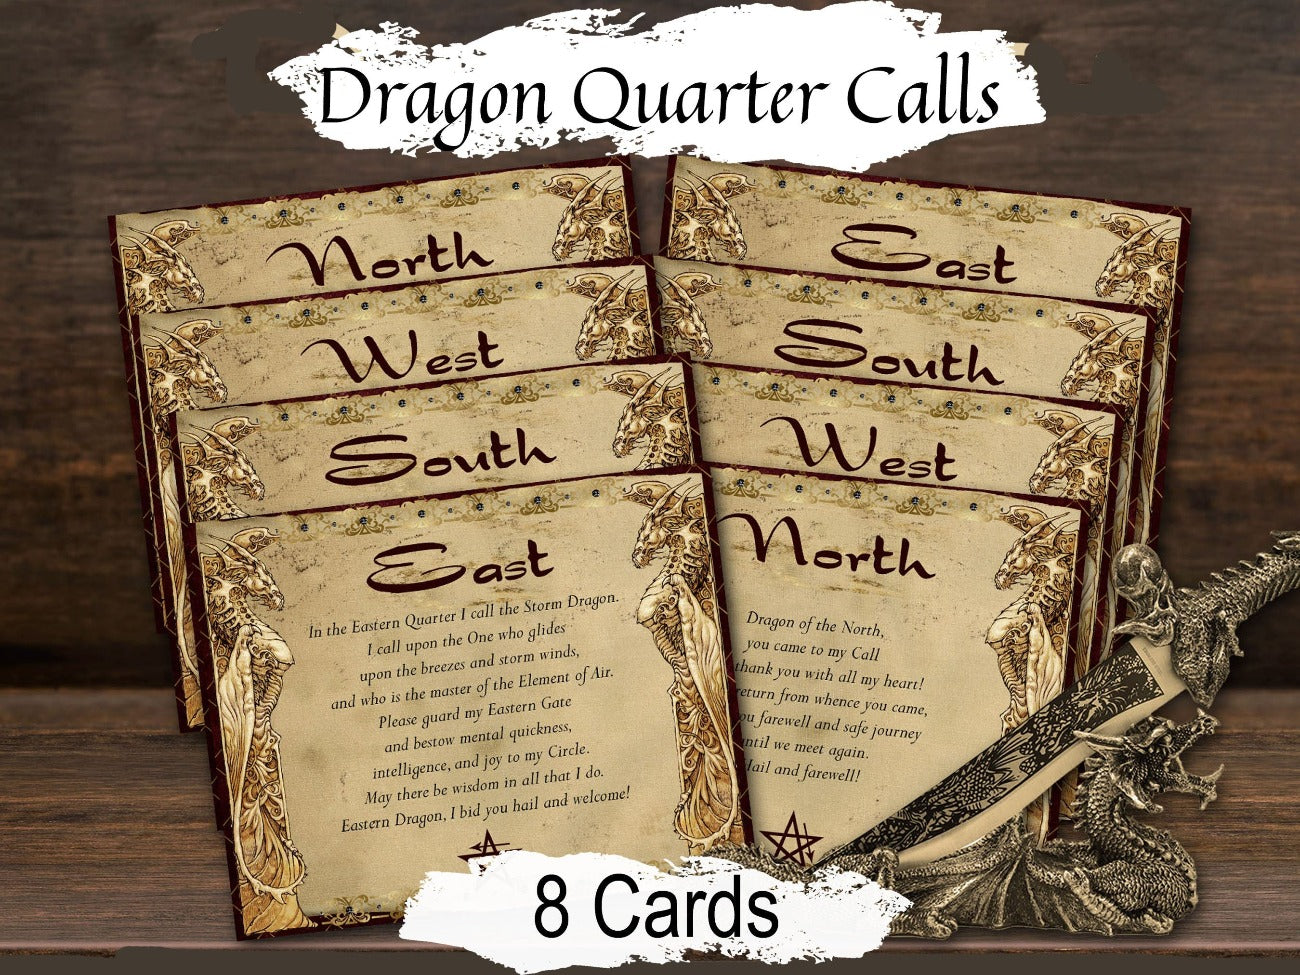 DRAGON QUARTER CALLS, Cast a Dragon Magic Circle, Call Dragons, Make Sacred Space, East, South, West & North Invoking and Banishing, 8 Cards - Morgana Magick Spell